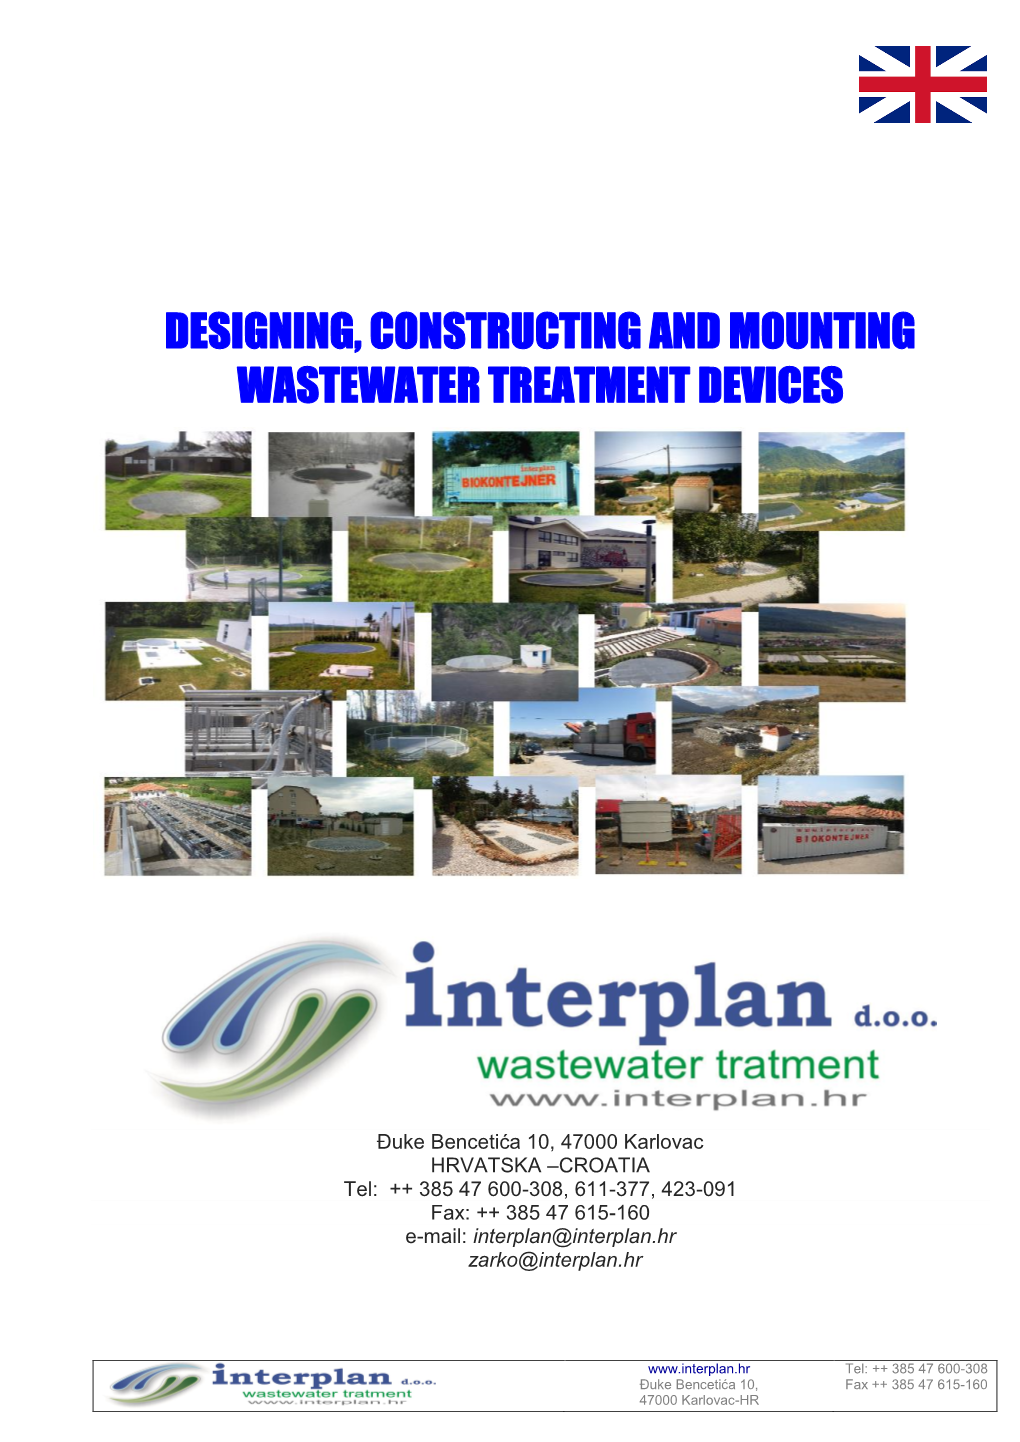 Designing, Constructing and Mounting Wastewater Treatment Devices